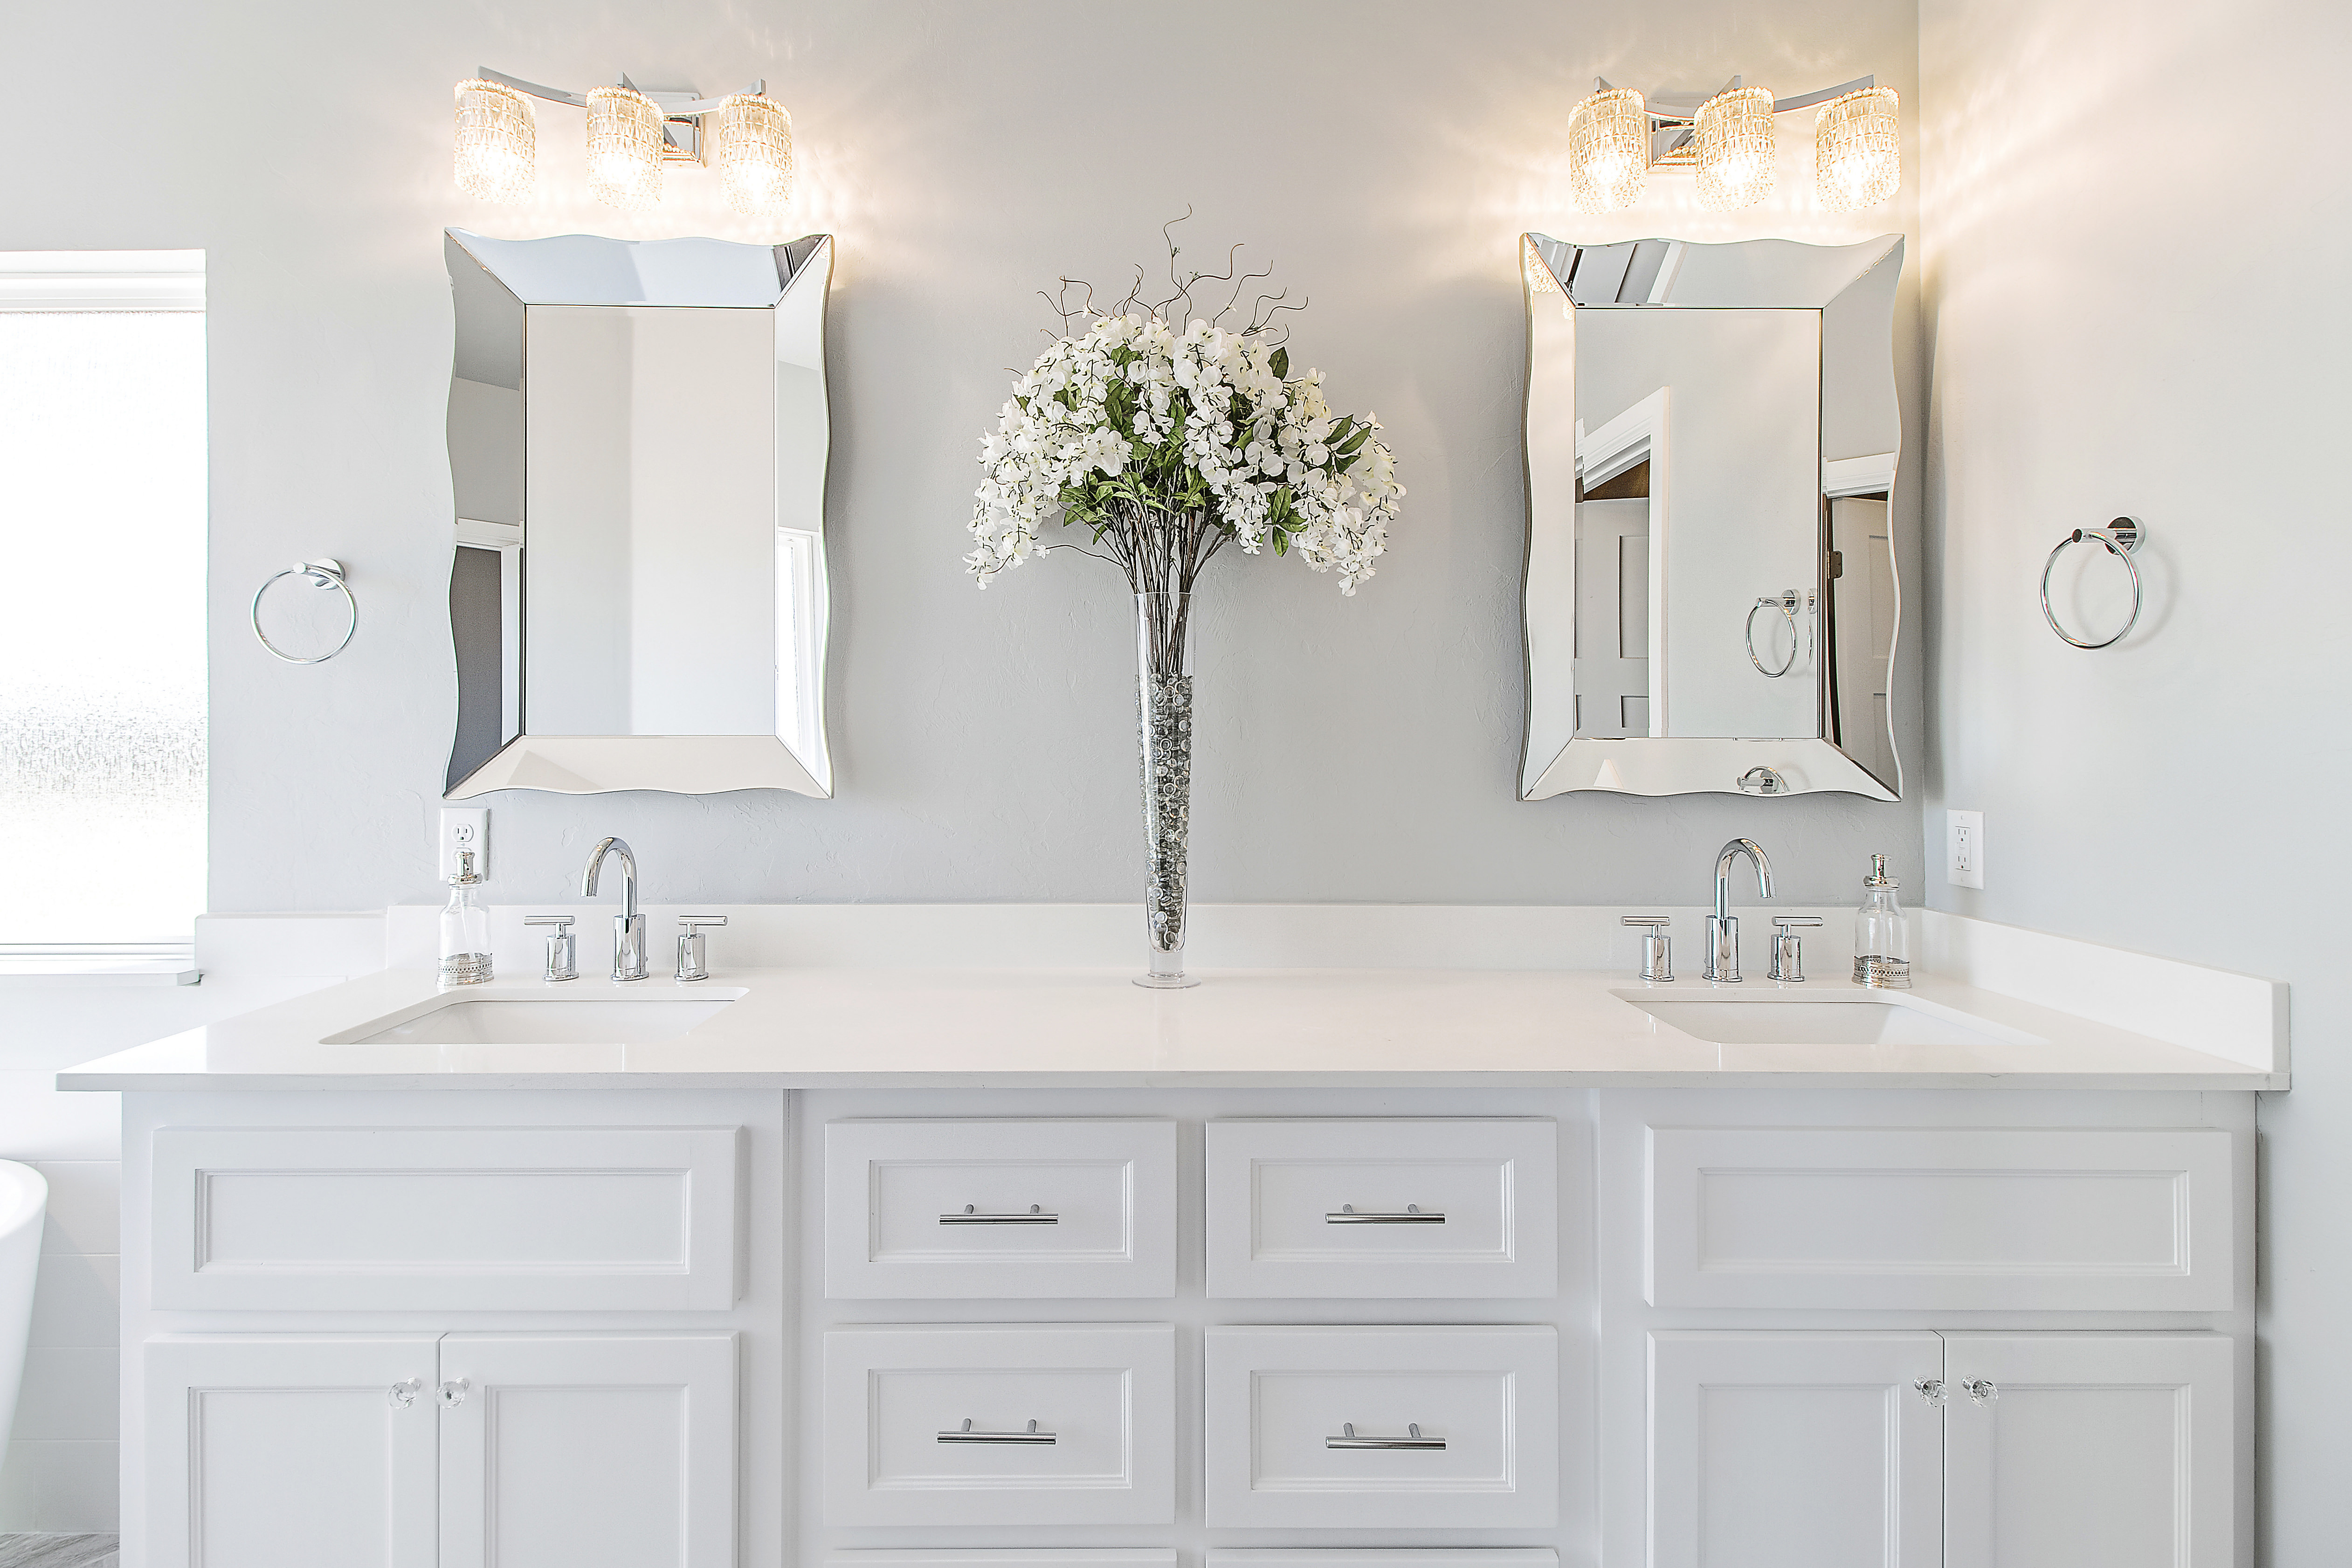 This bathroom makeover uses neutral cabinets and accents to improve the overall look and feel